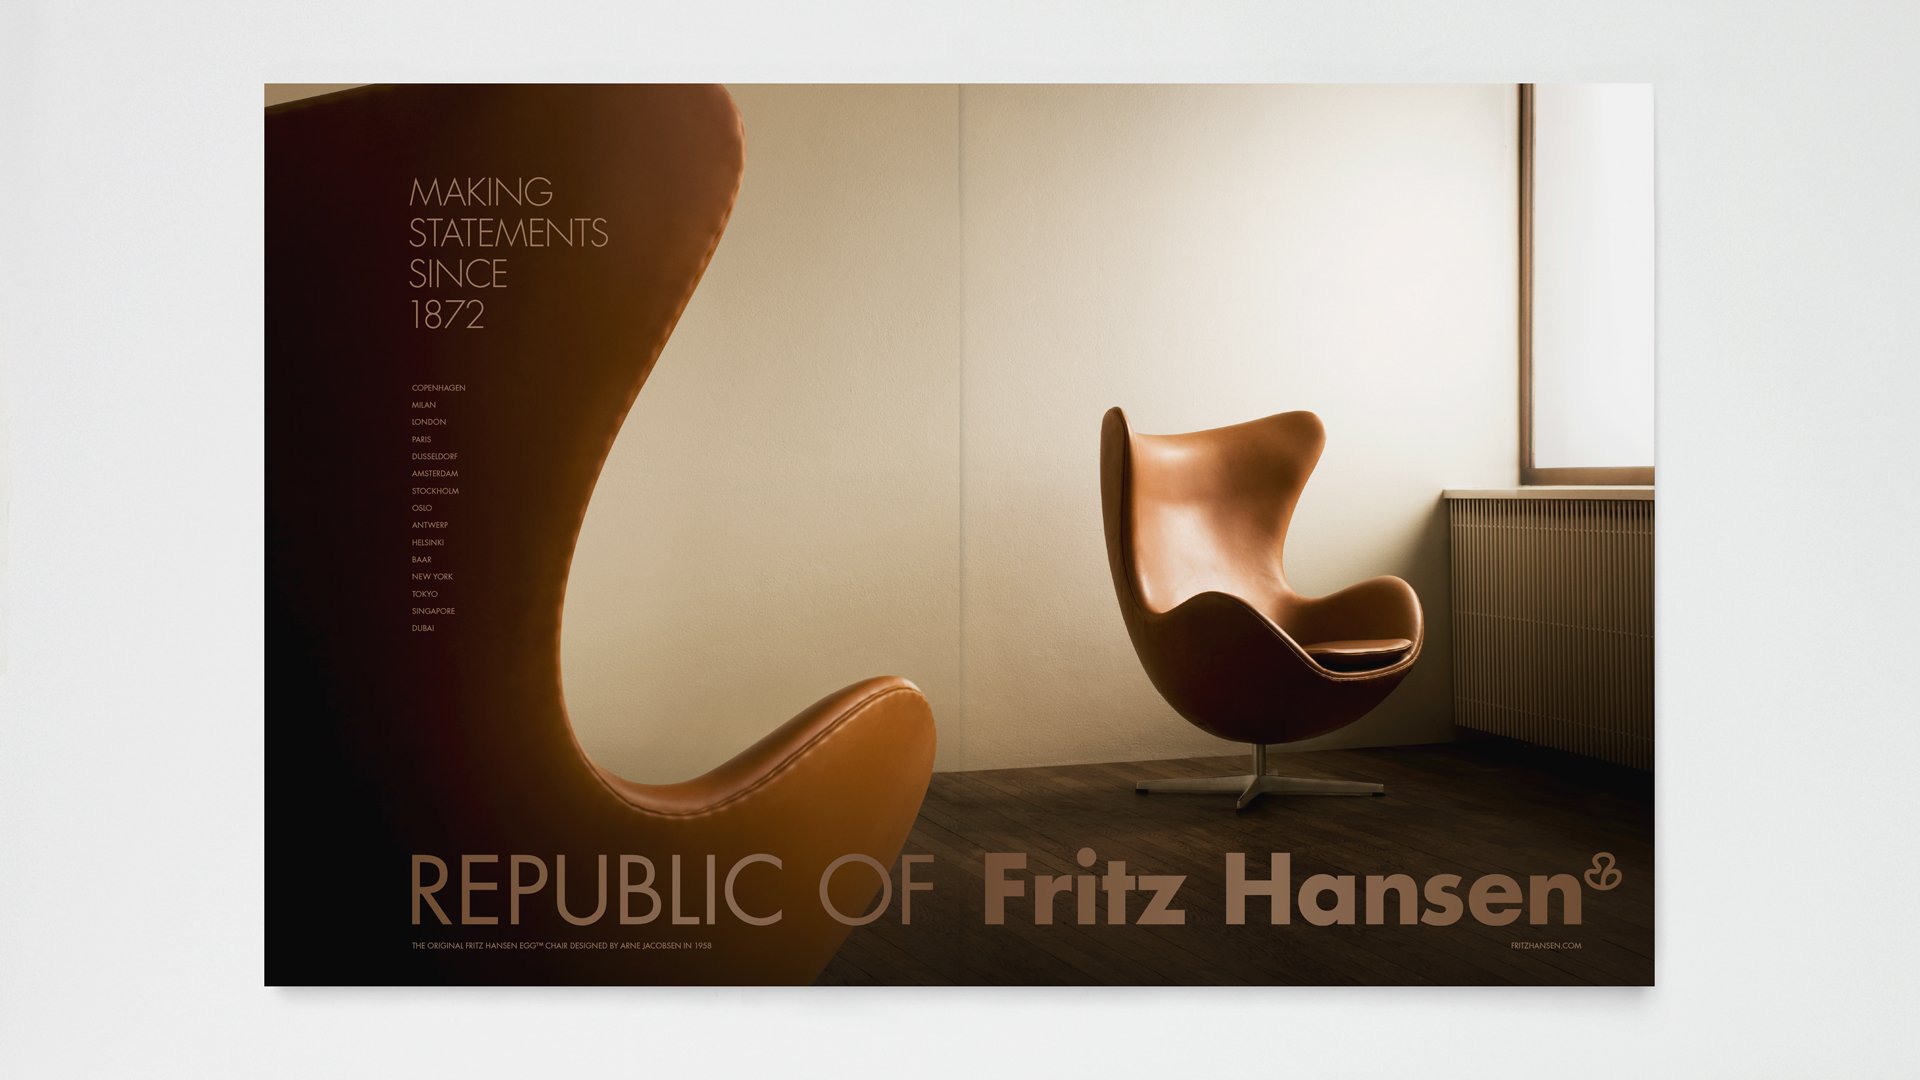 Image of the egg chair with Fritz Hansen logo. Made by LOOP Associates